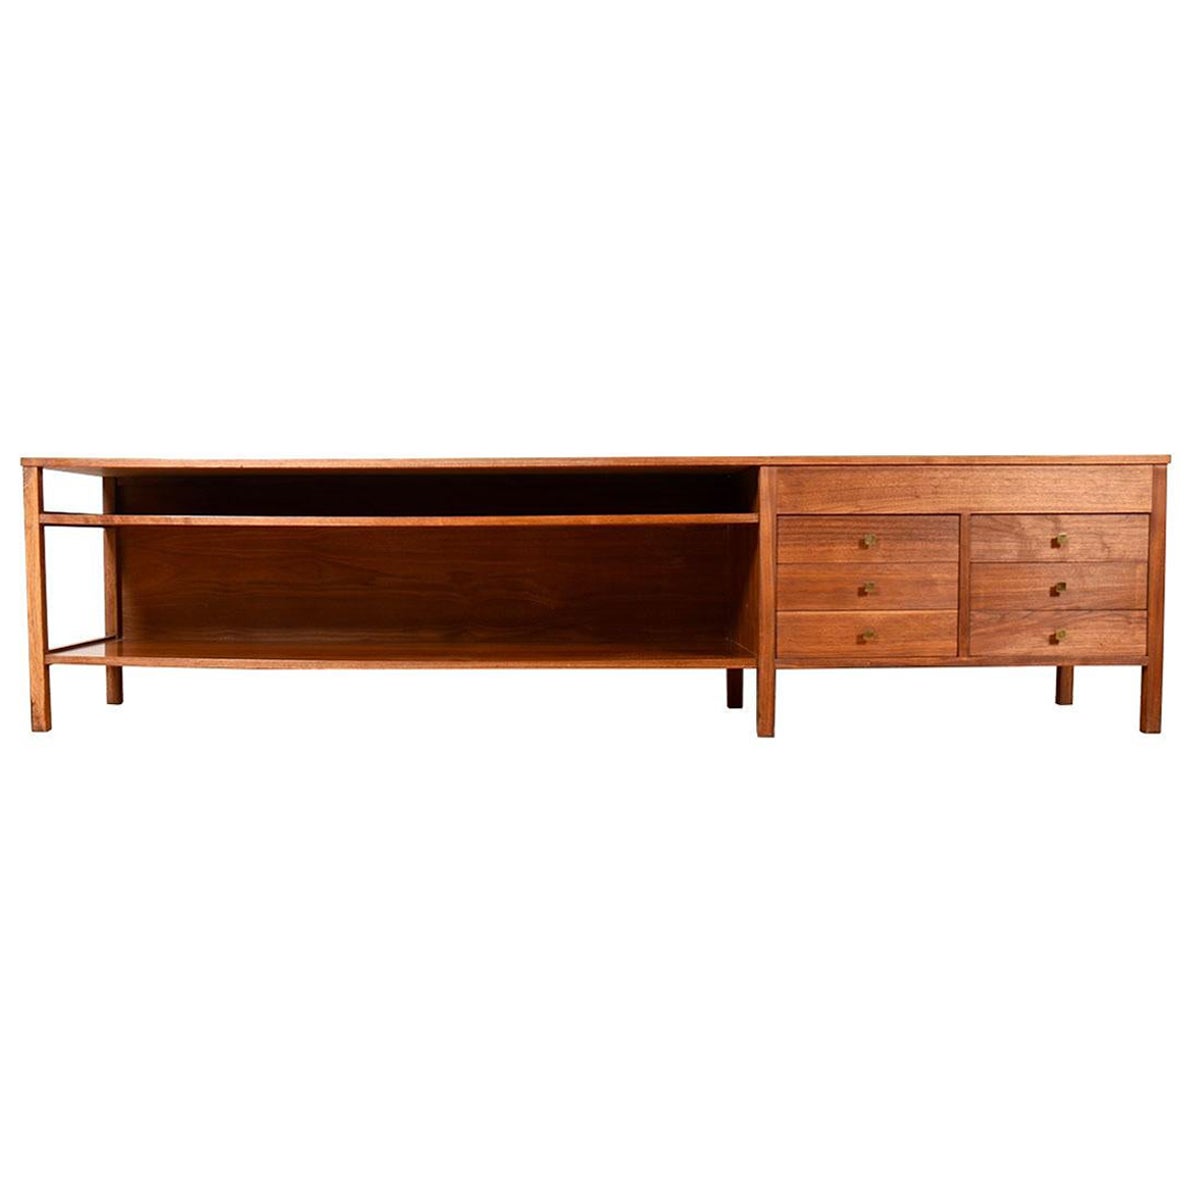 Low Entertainment Console Drawers/ Accent Table by Paul McCobb, circa 1950s